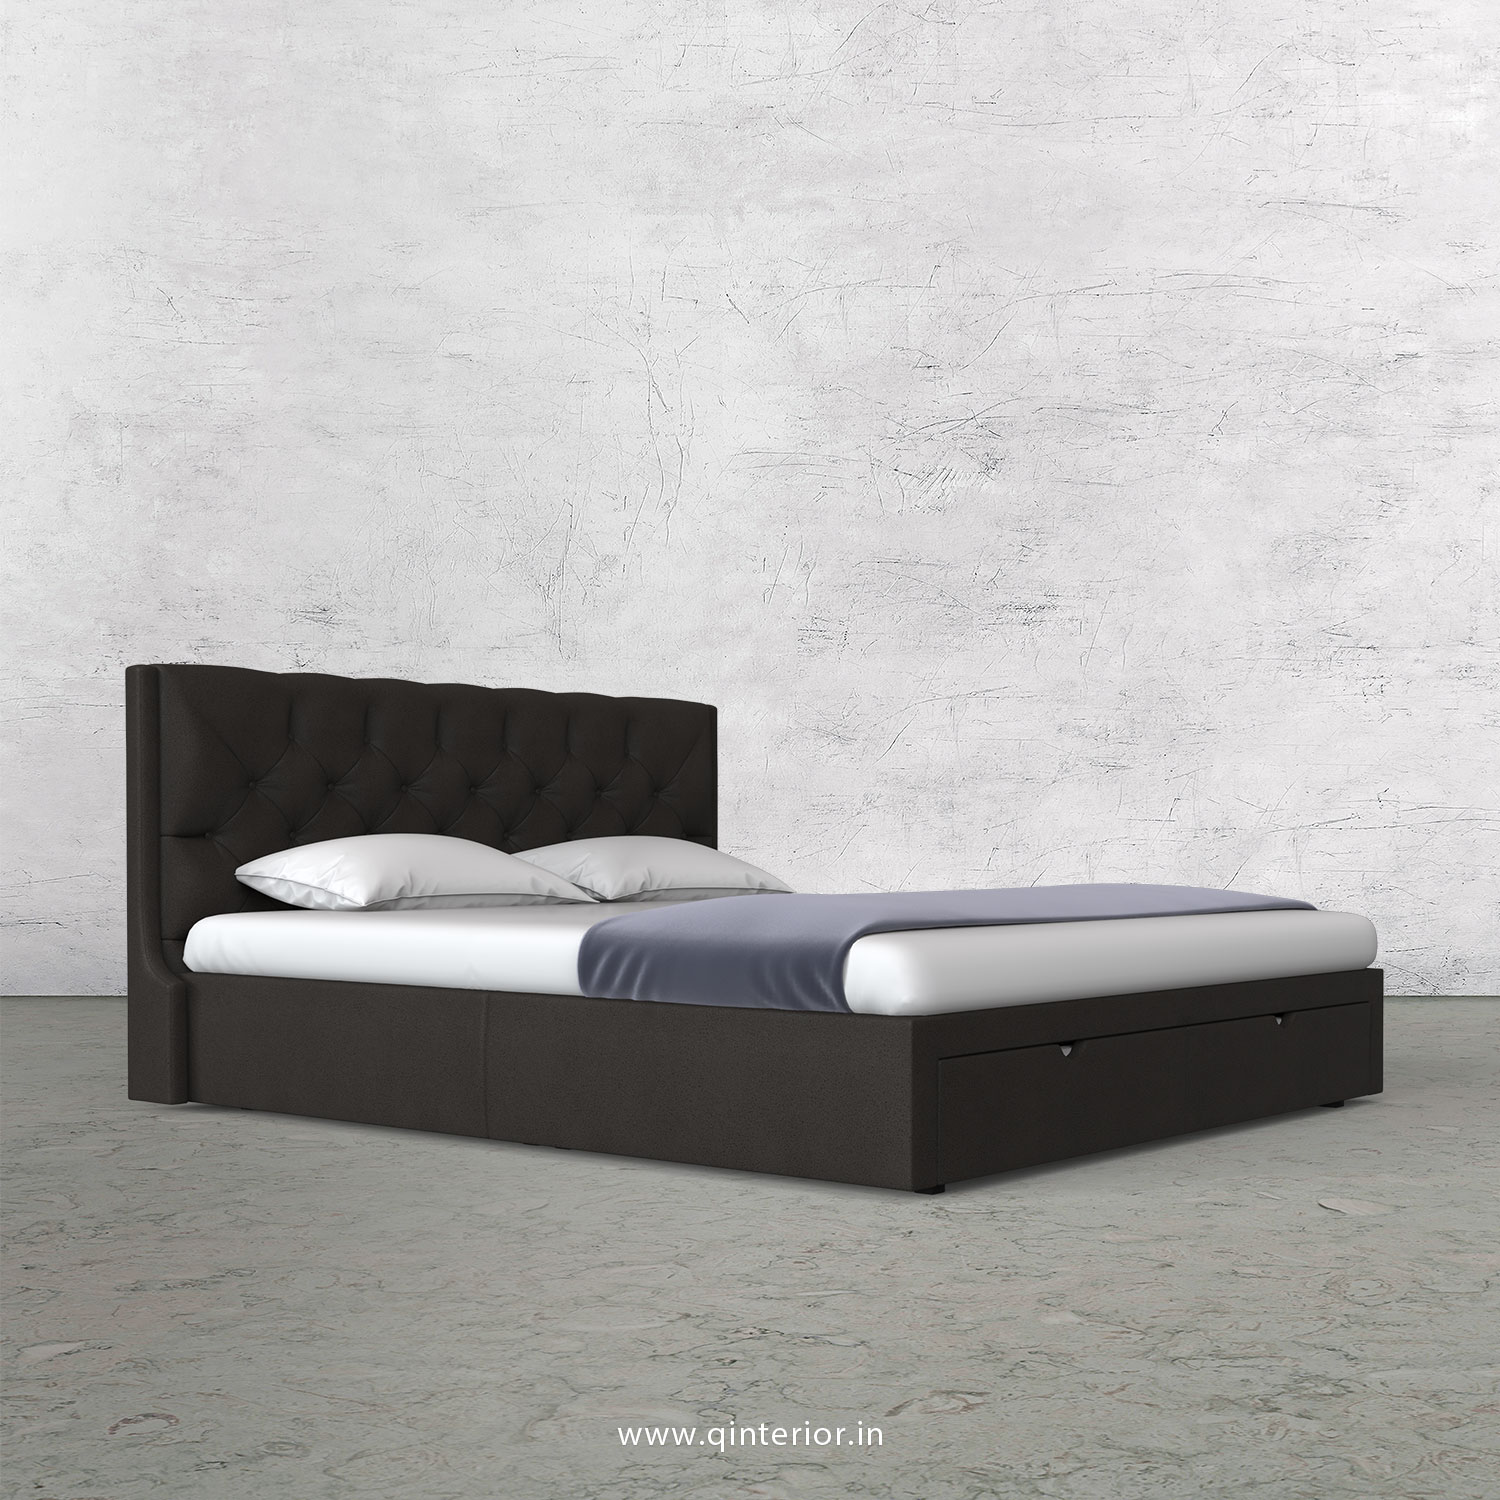 Scorpius Queen Storage Bed in Fab Leather Fabric - QBD001 FL15